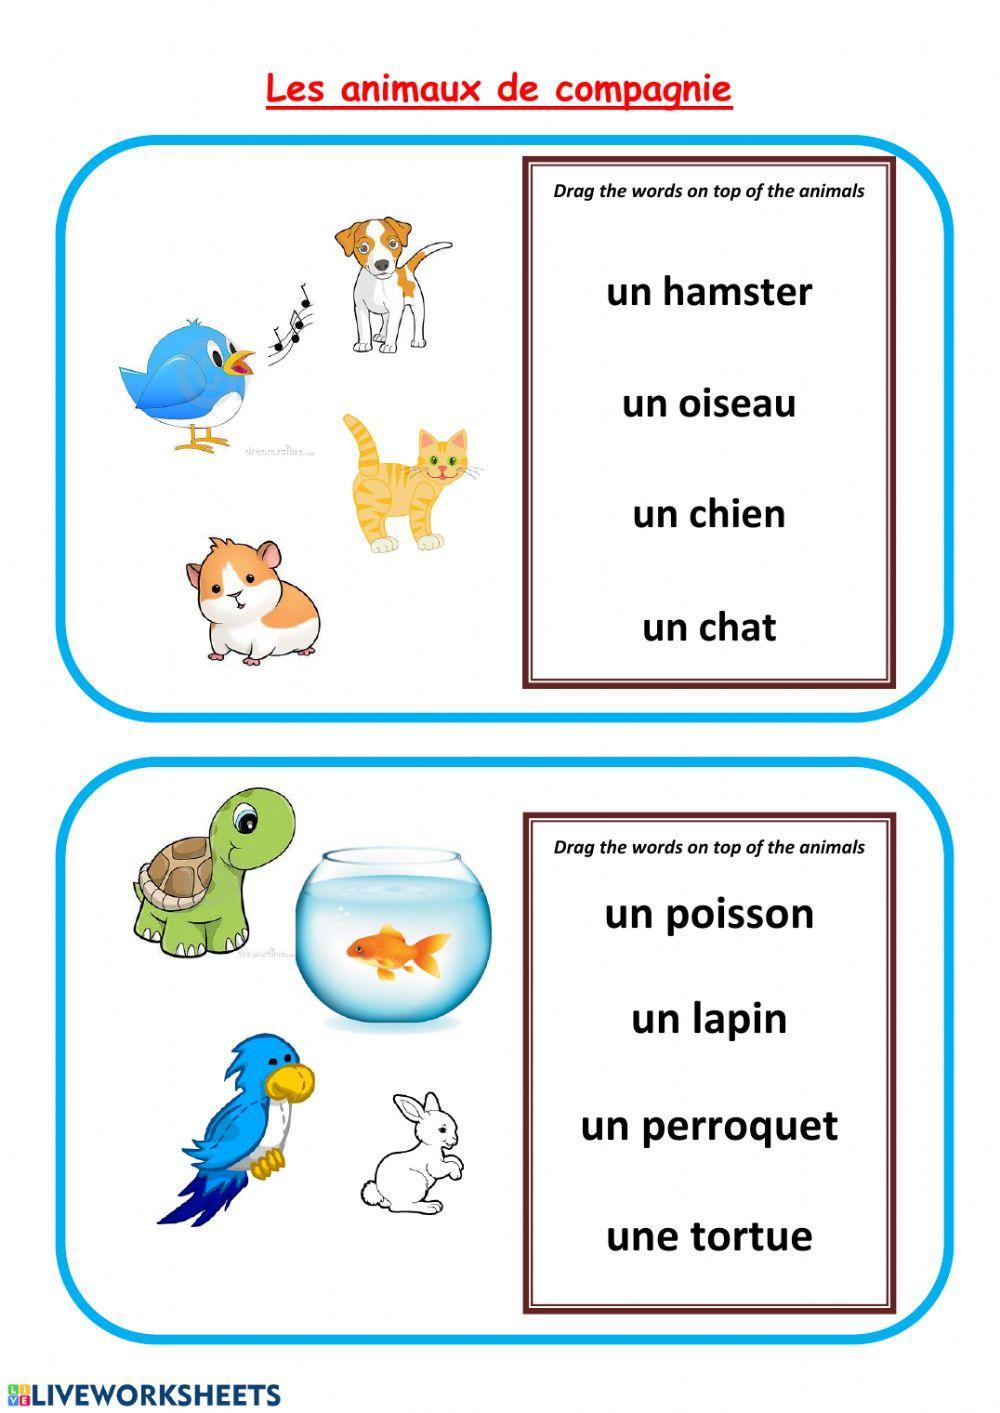 Animaux de compagnie-pets in French